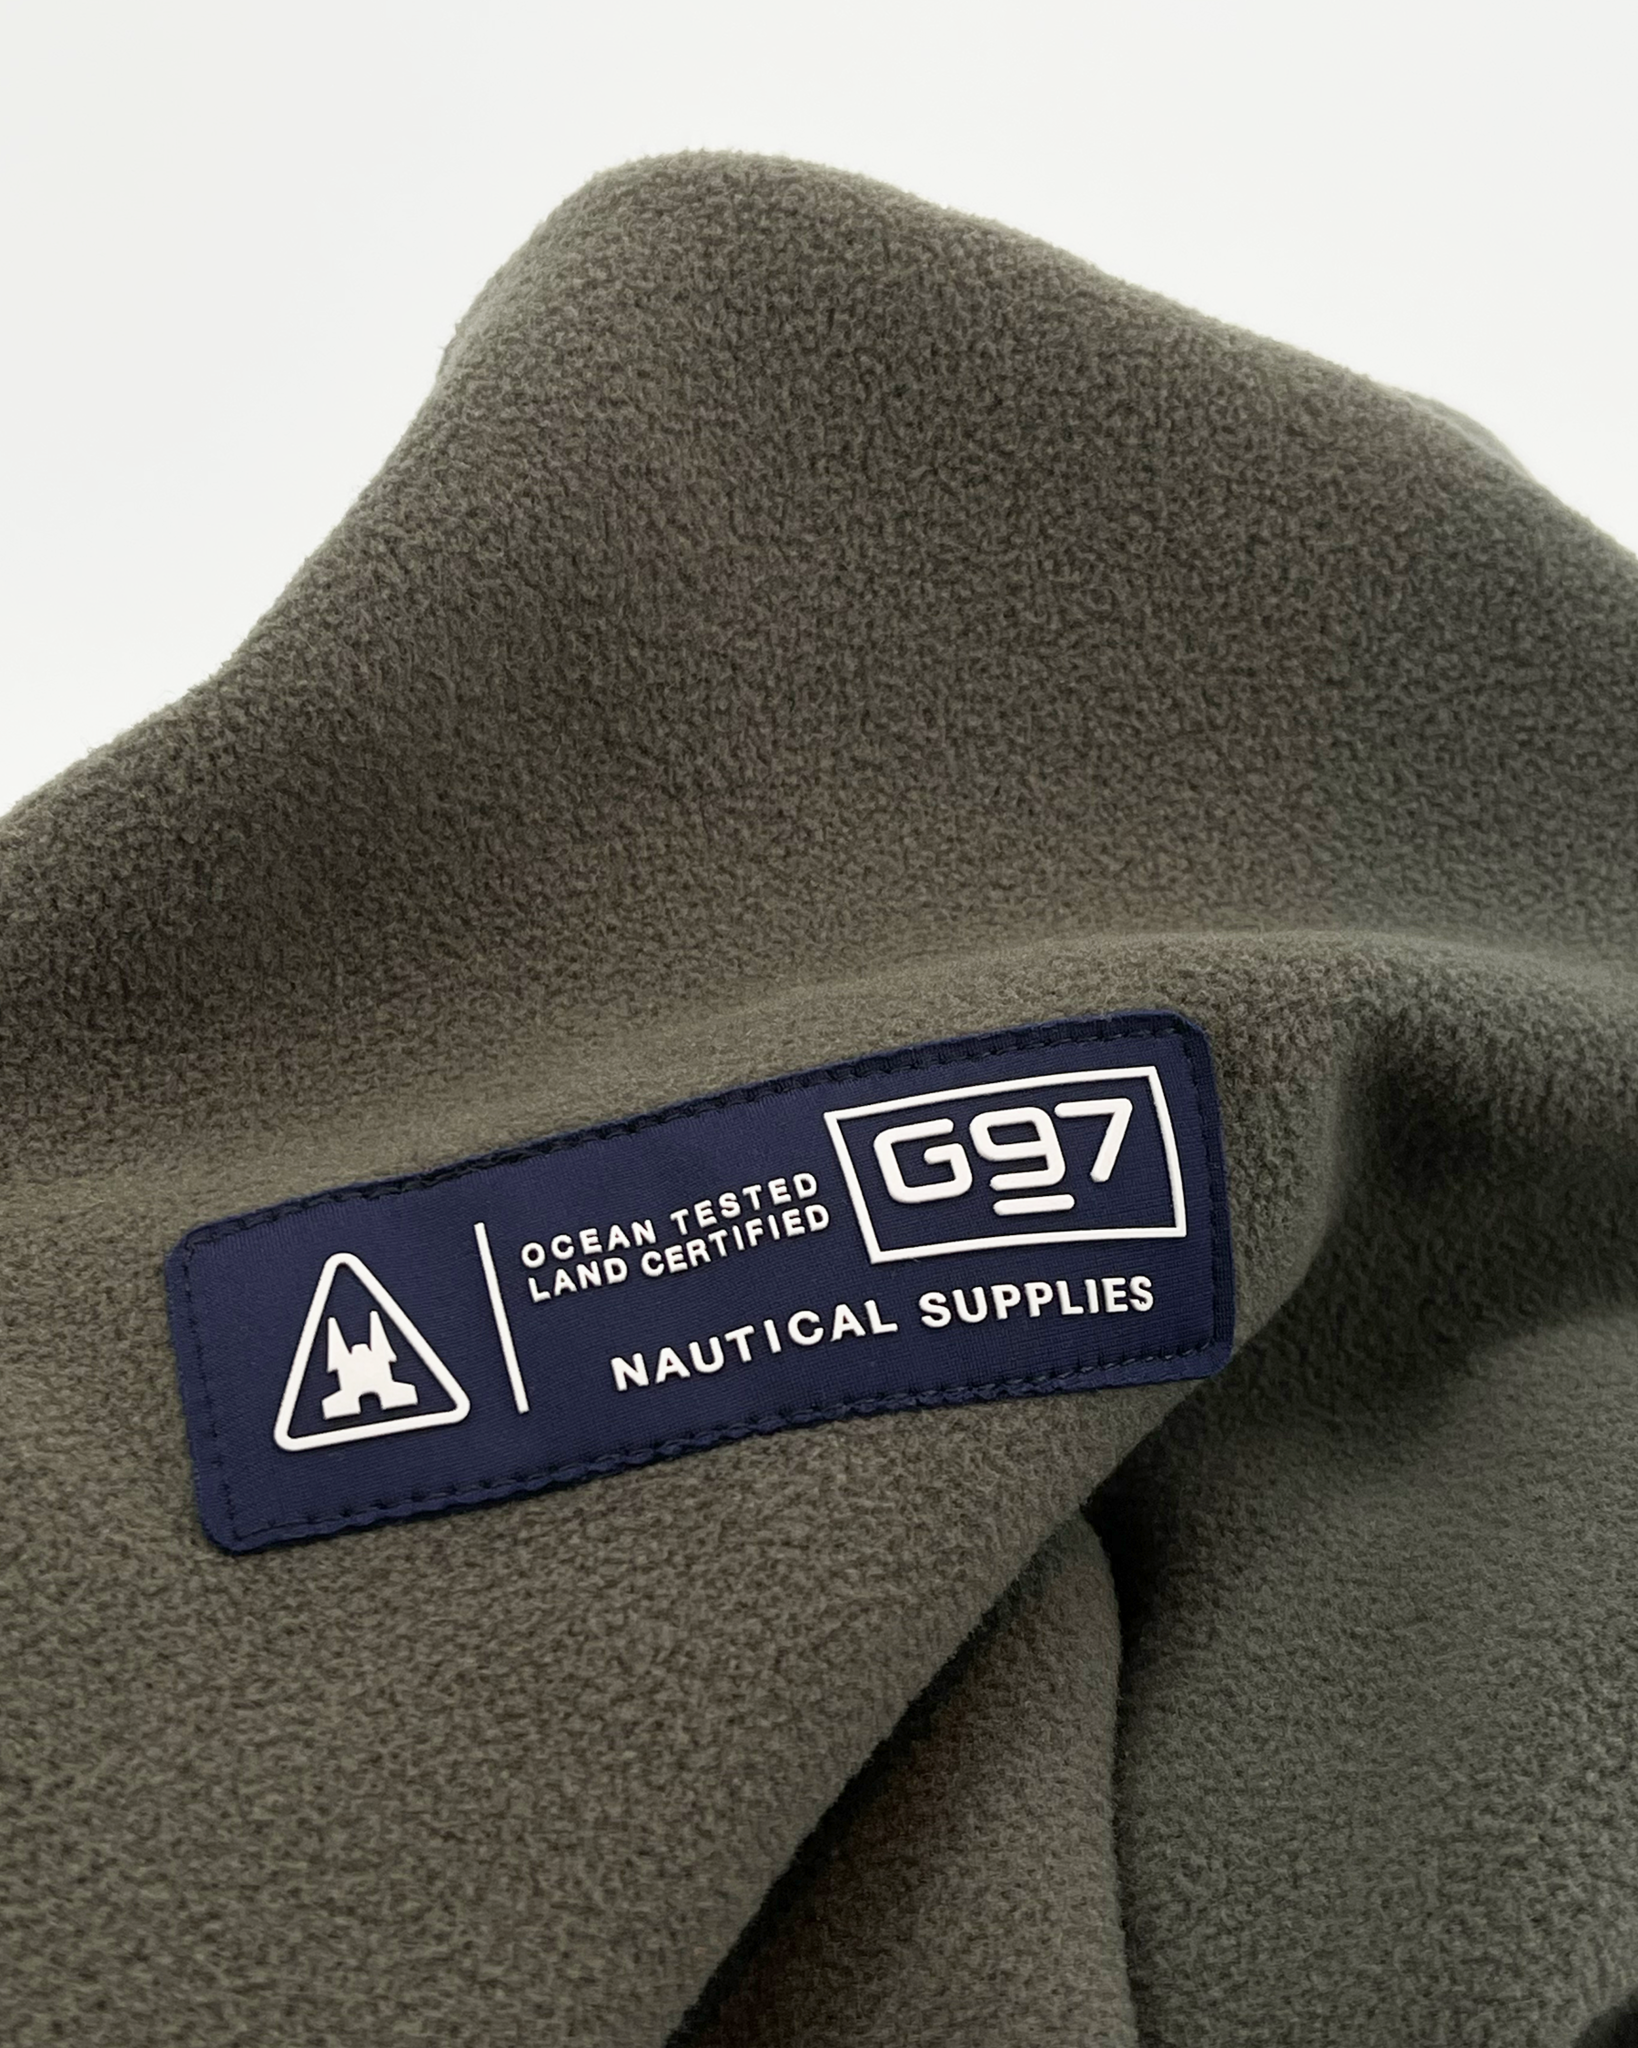 The 100% recycled polyester Vostock fleece